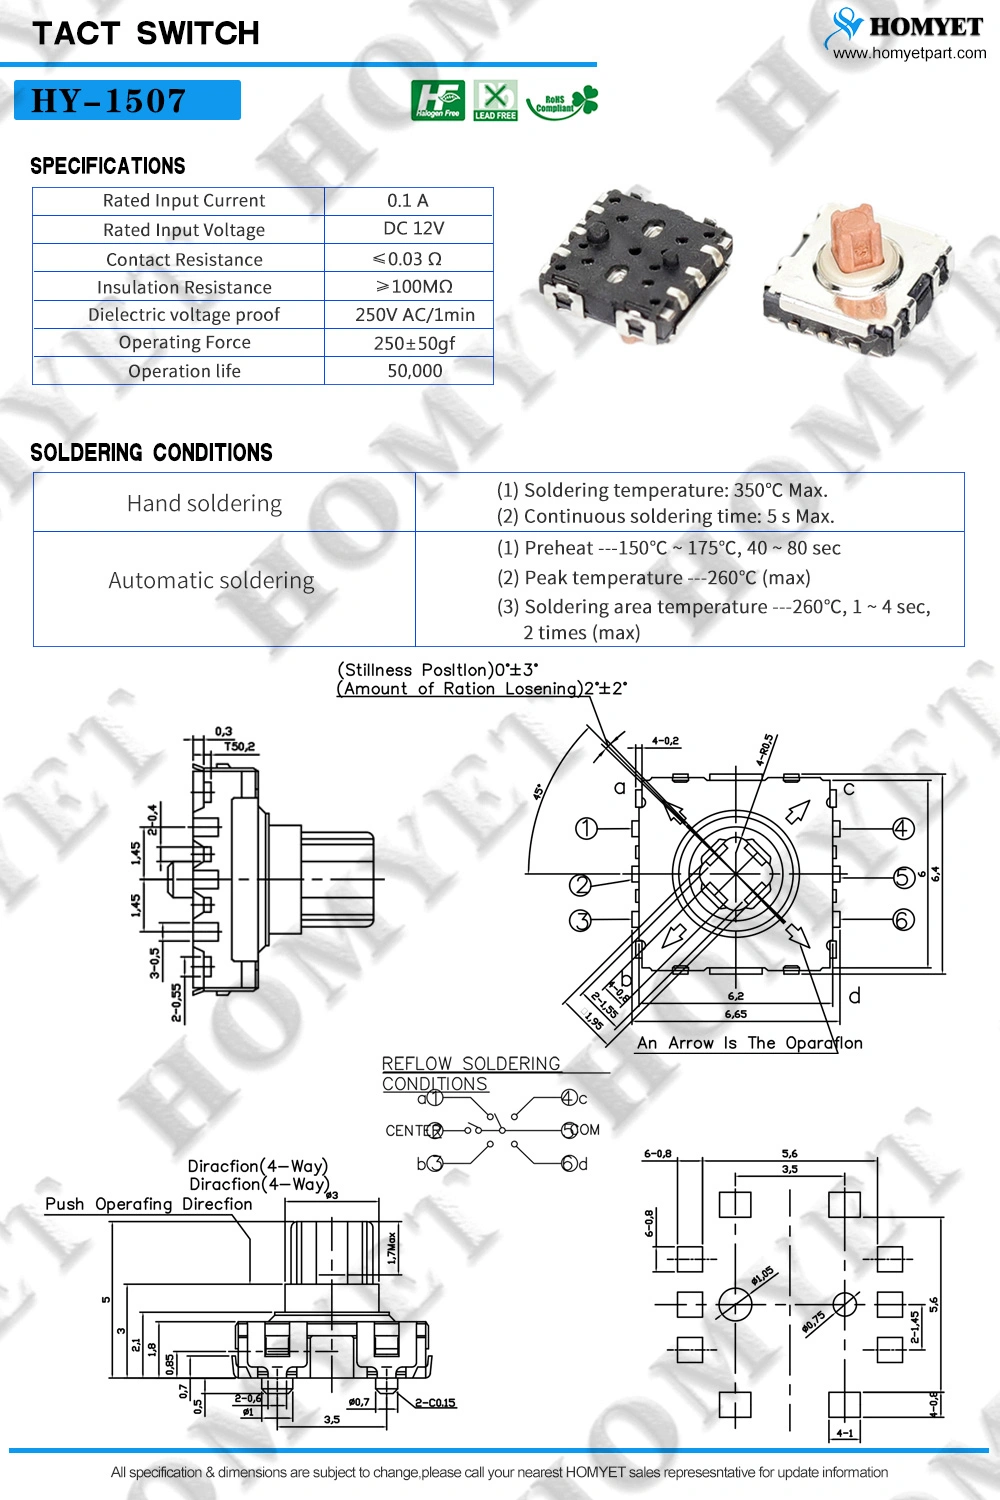 Manufacturer Surface Mount Multi-Directional Switch 4-Direction Type with Center-Push Function